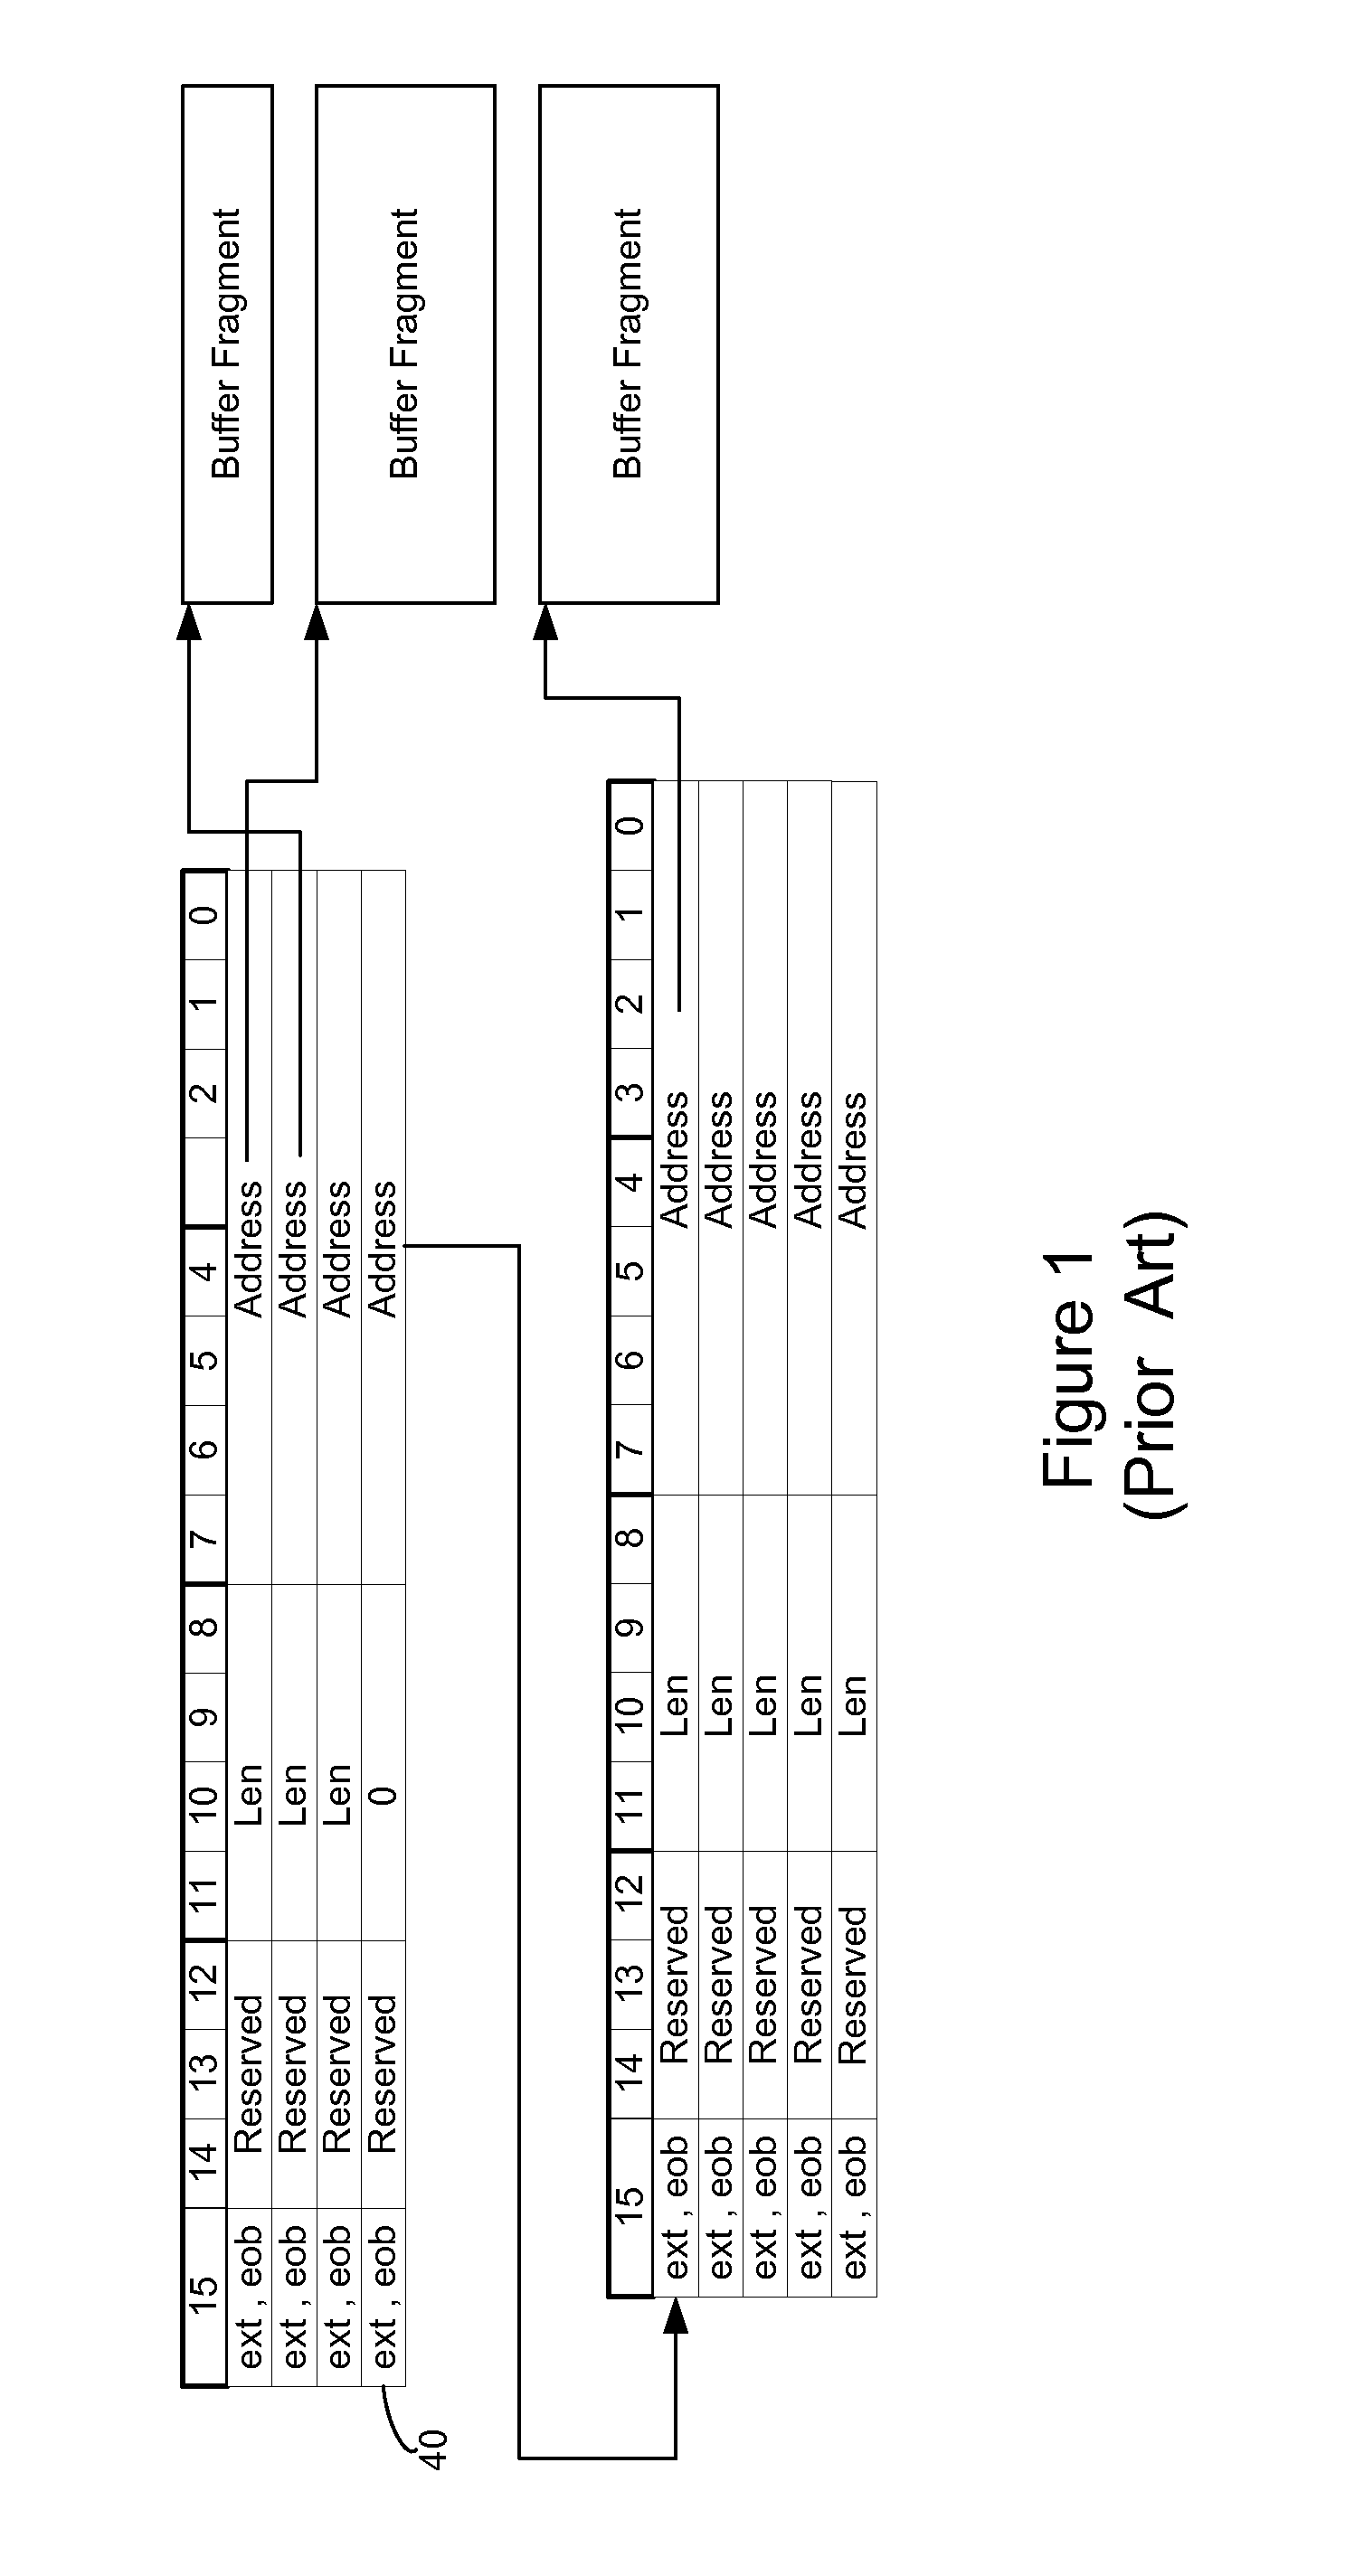 Logical address direct memory access with multiple concurrent physical ports and internal switching